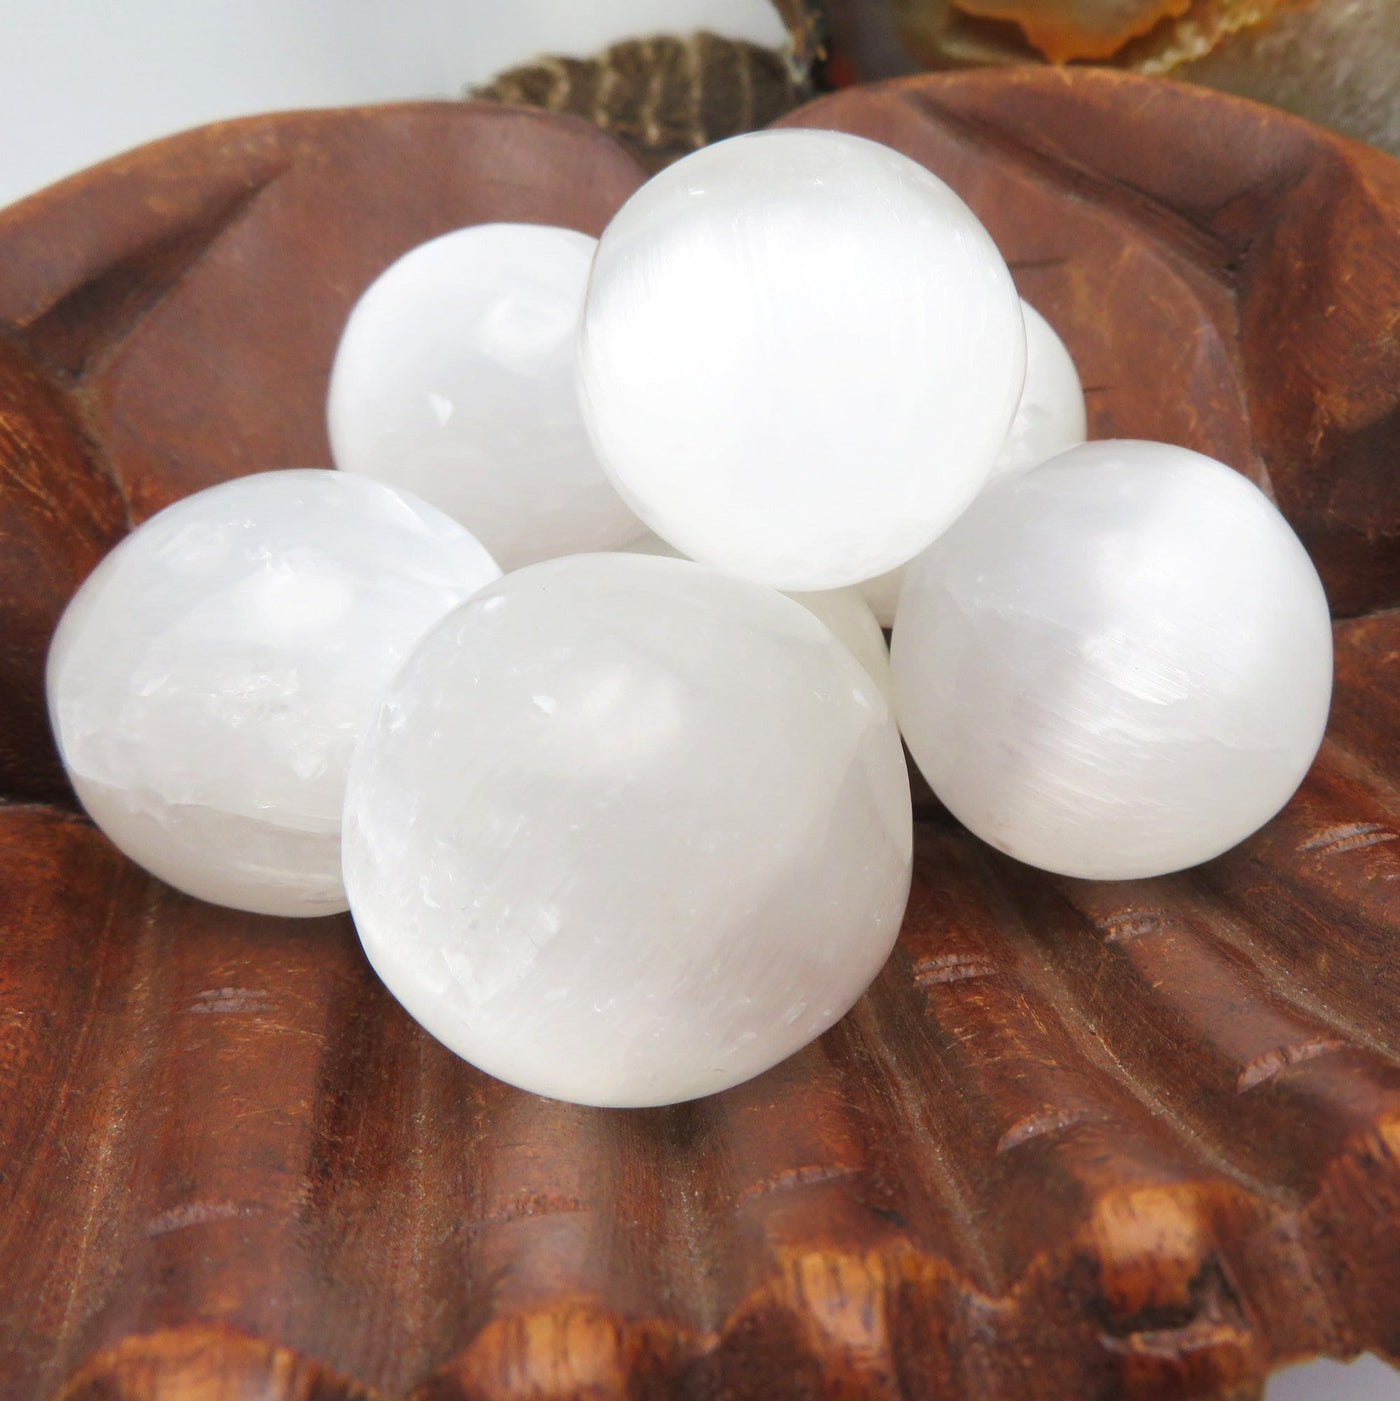 close up of selenite spheres in hand bowl for details and possible variations